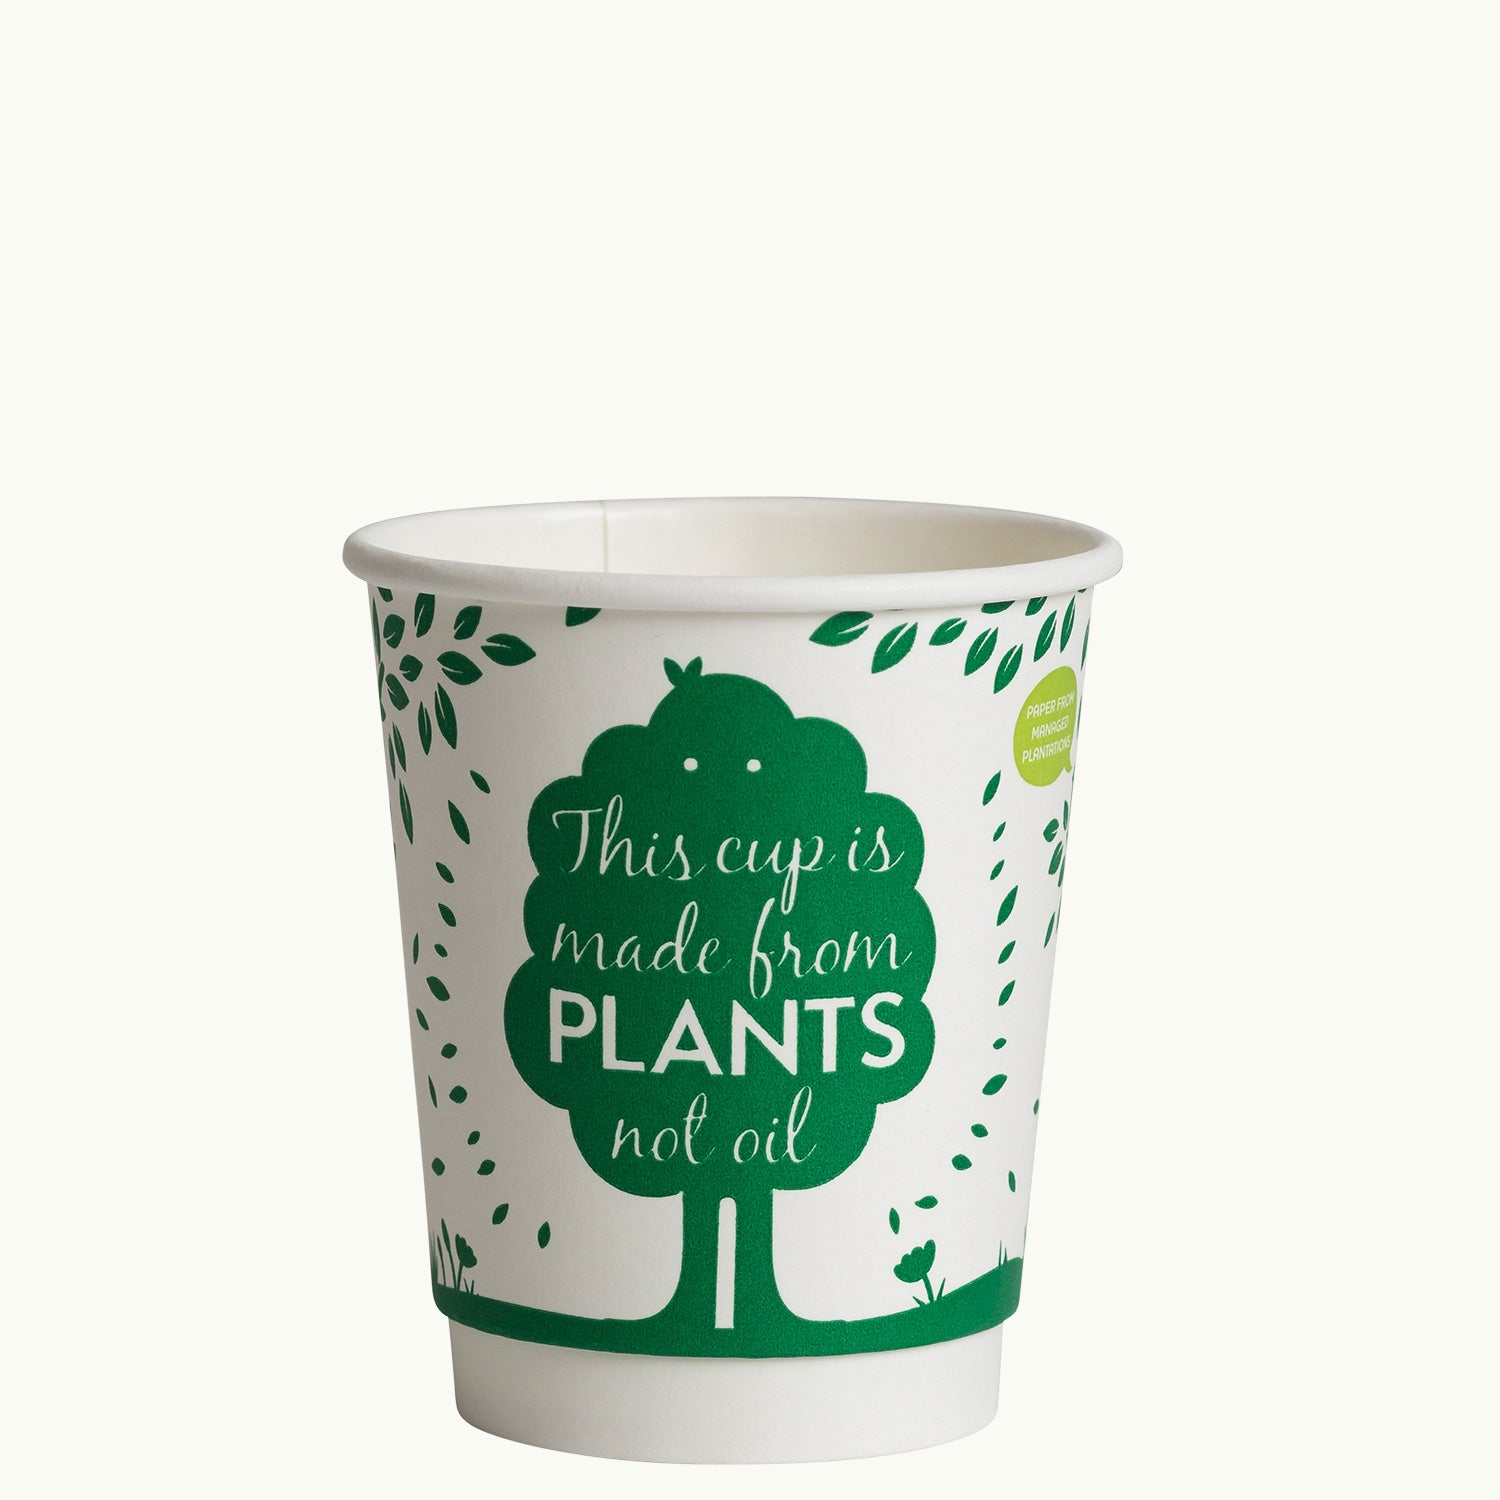 Ecoware double wall coffee cup printed this cup is made from plants not oil